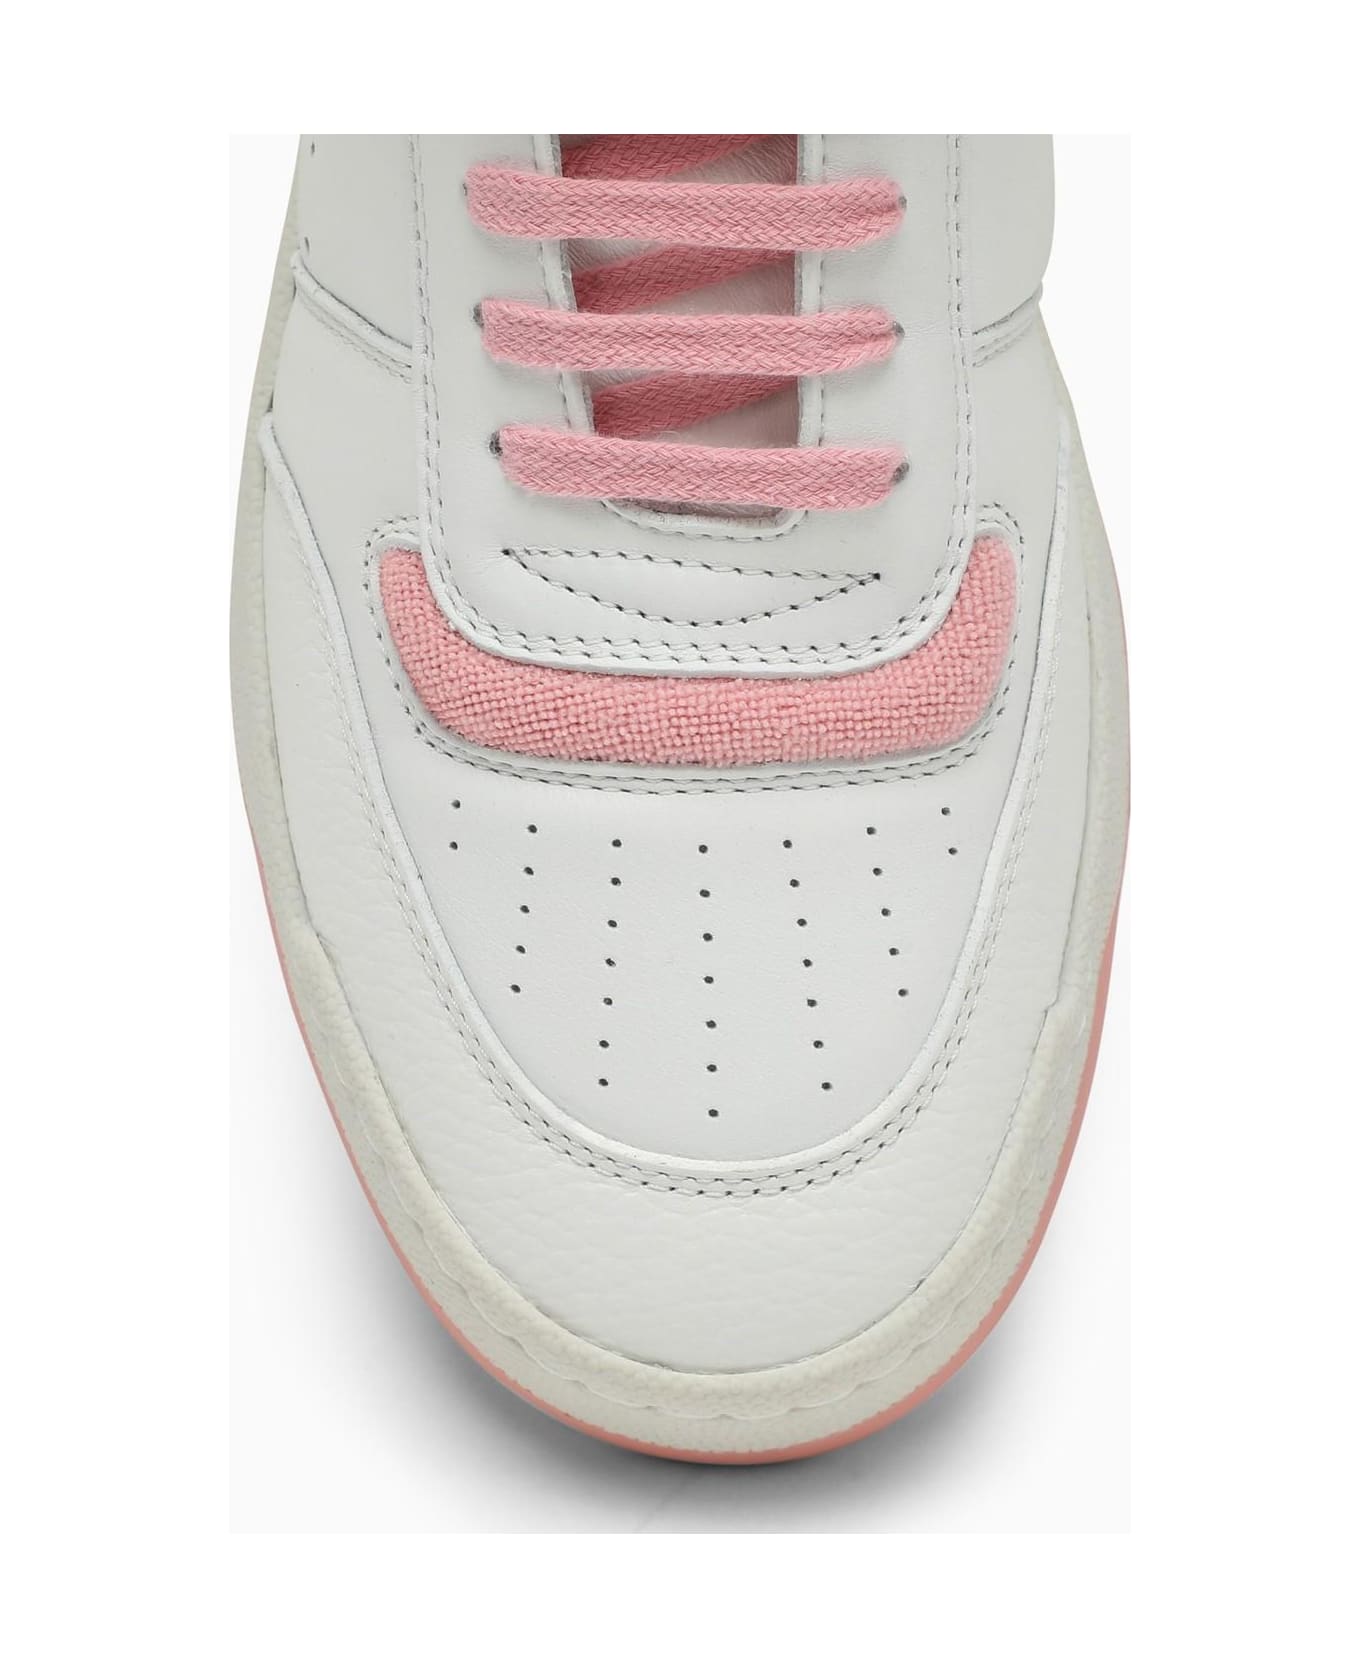 Saint Laurent Sl\/80 White\/pink Leather Sneakers - WHITE スニーカー